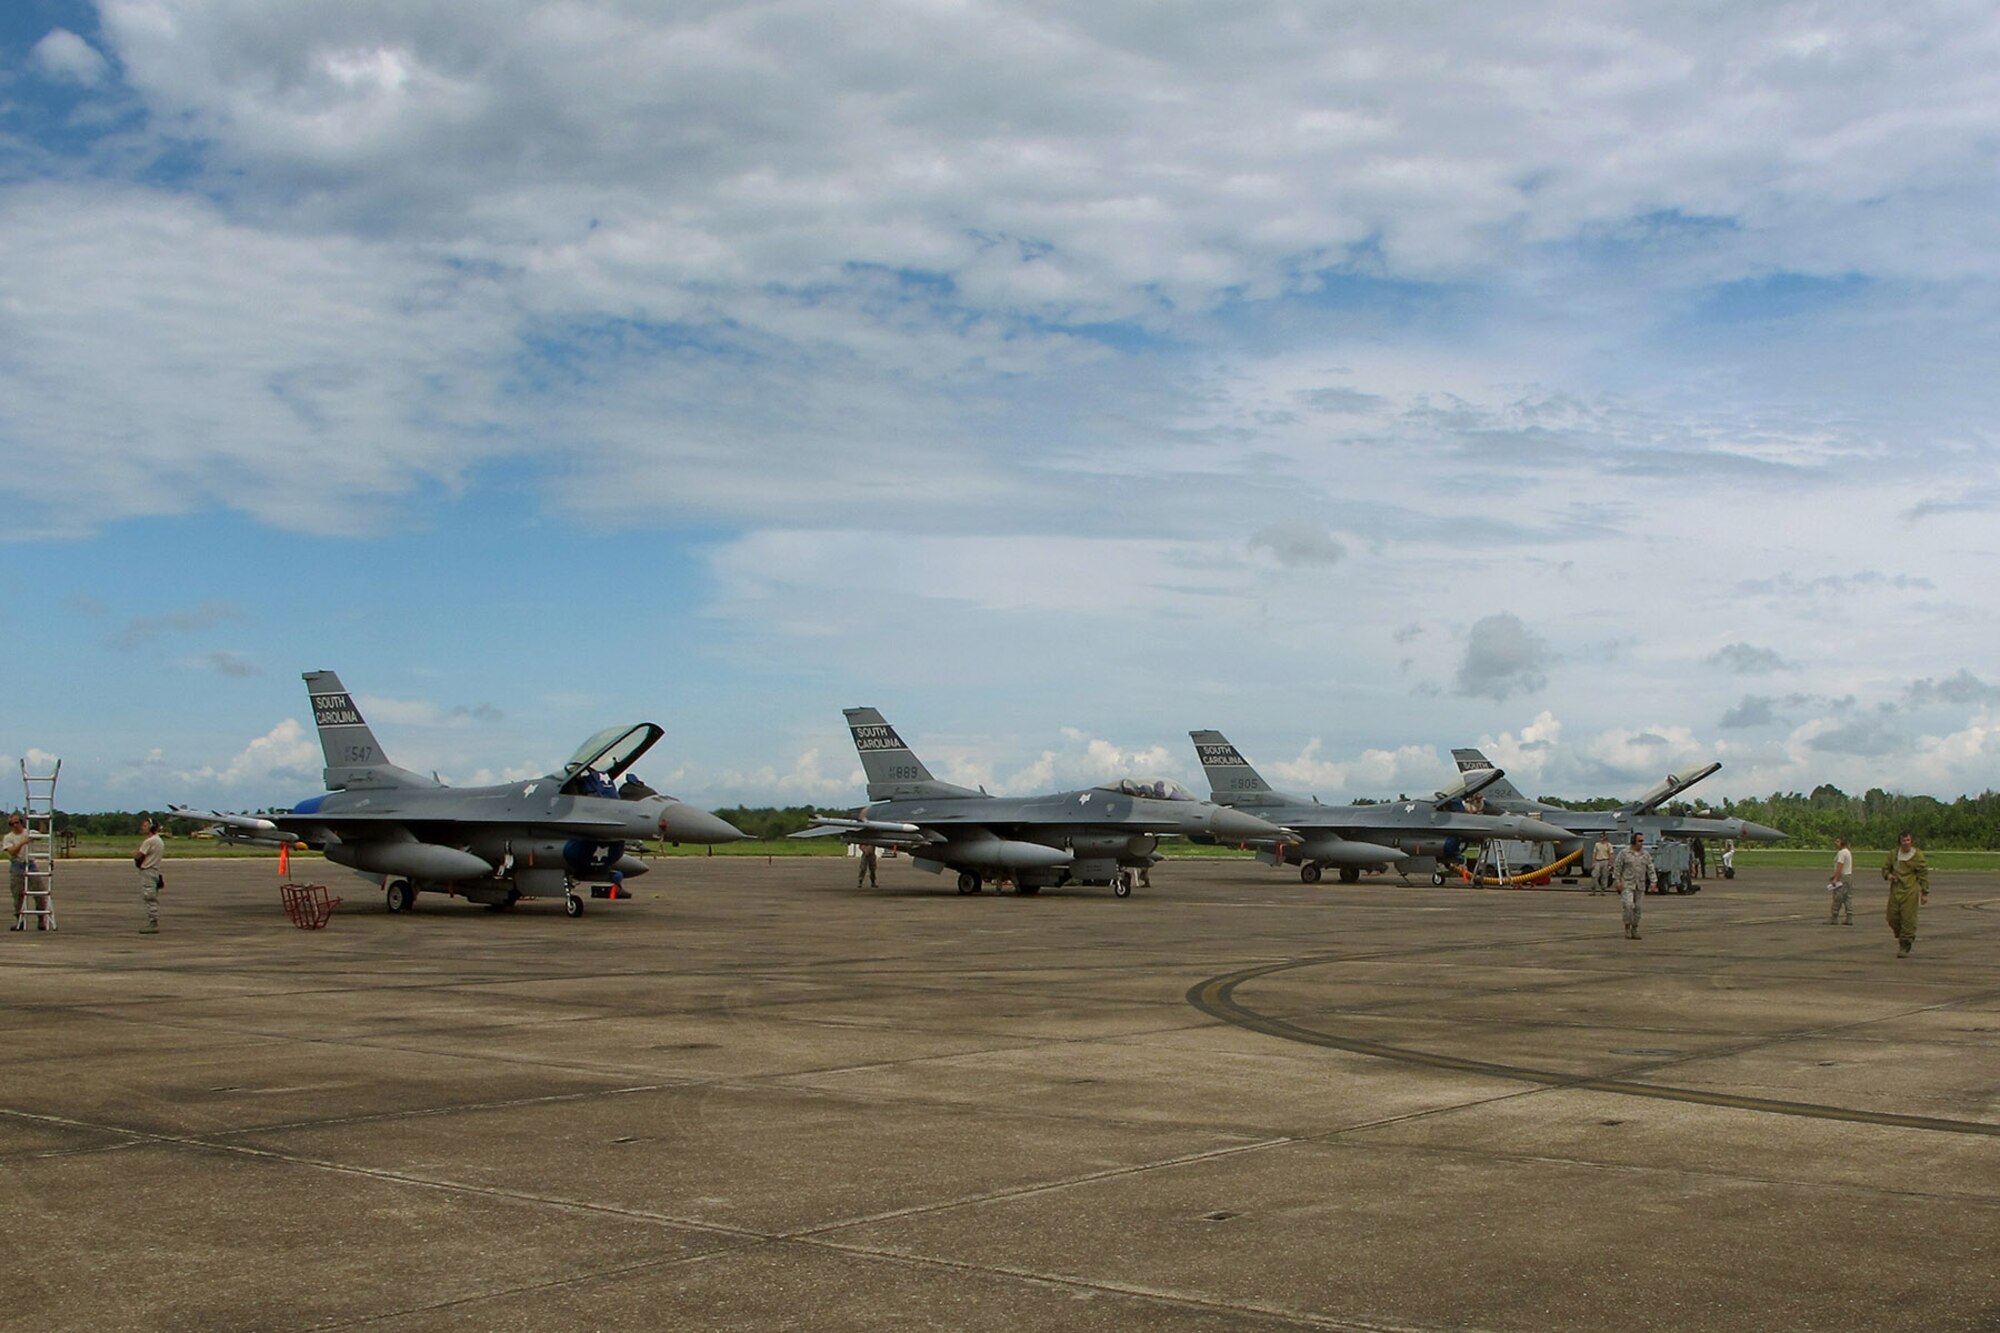 U.S. Air Force Airmen with the South Carolina Air National Guard from McEntire Joint National Guard Base, S.C., conduct flight line activities during an F-16 Fighting Falcon training mission at the Naval Air Station Joint Reserve Base New Orleans, La., June 19, 2013.   (U.S. Air National Guard photo by 157th Fighter Squadron Unit Public Affairs Representative/Released)